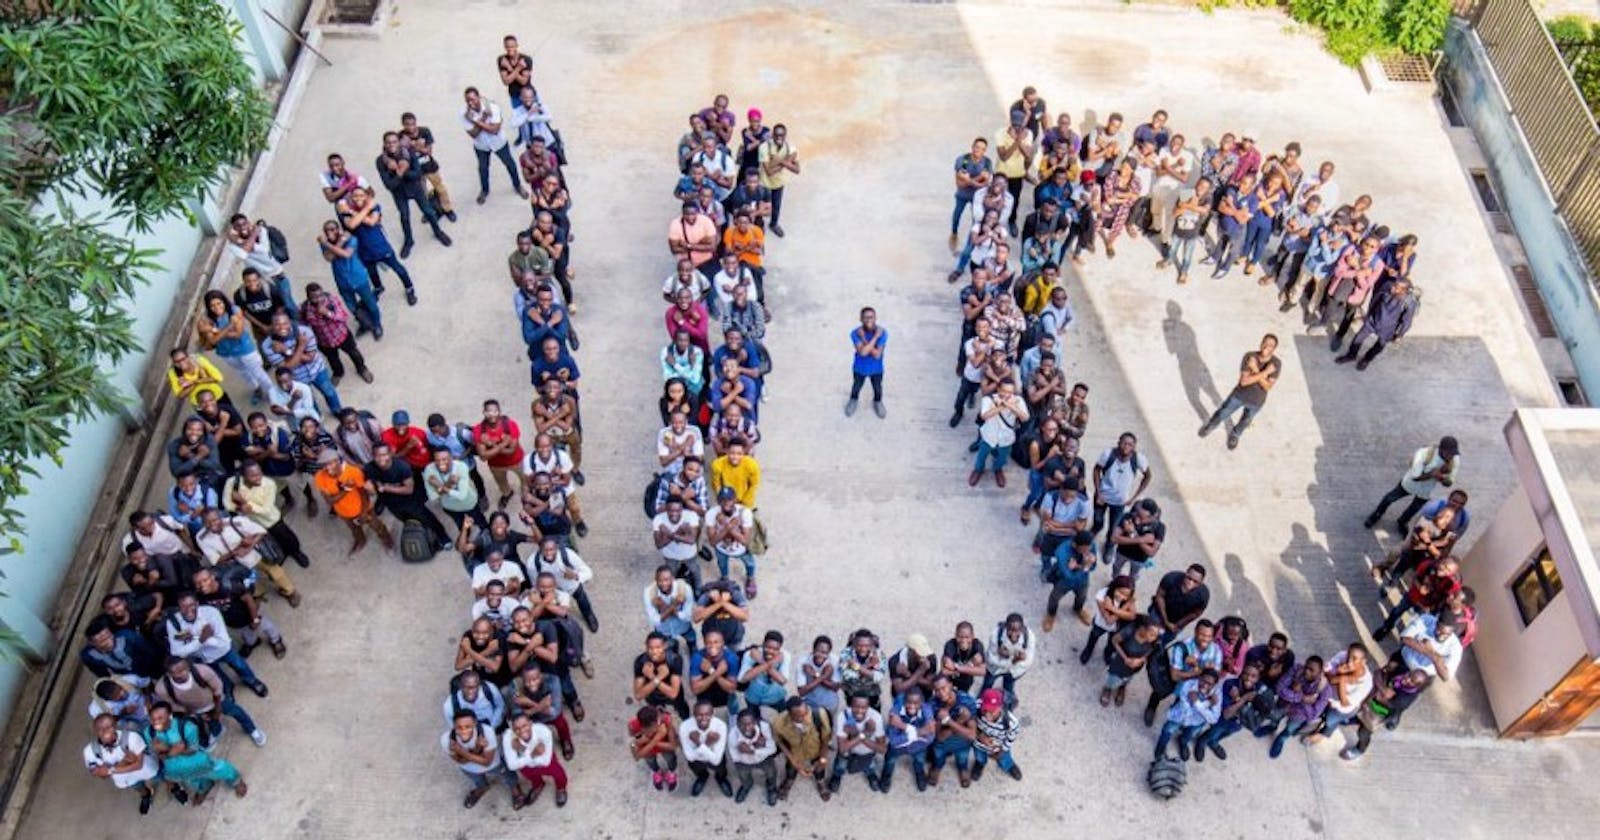 A warm Thank You to the Andela Learning Community